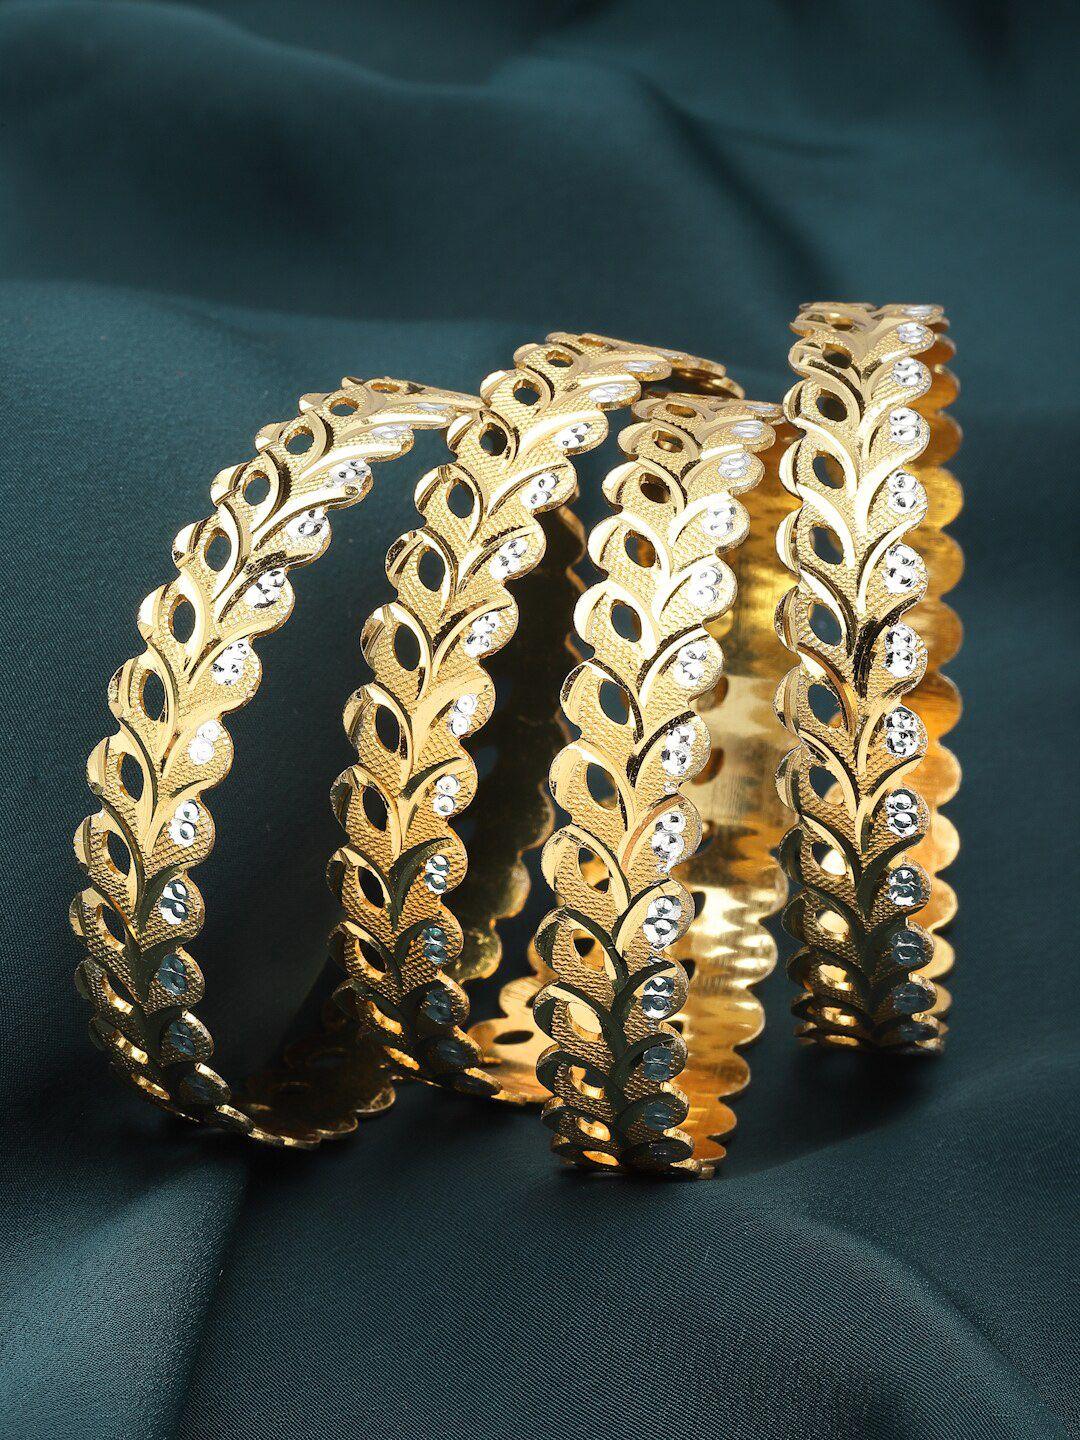 zeneme set of 4 gold-plated dual tone leaf textured bangles